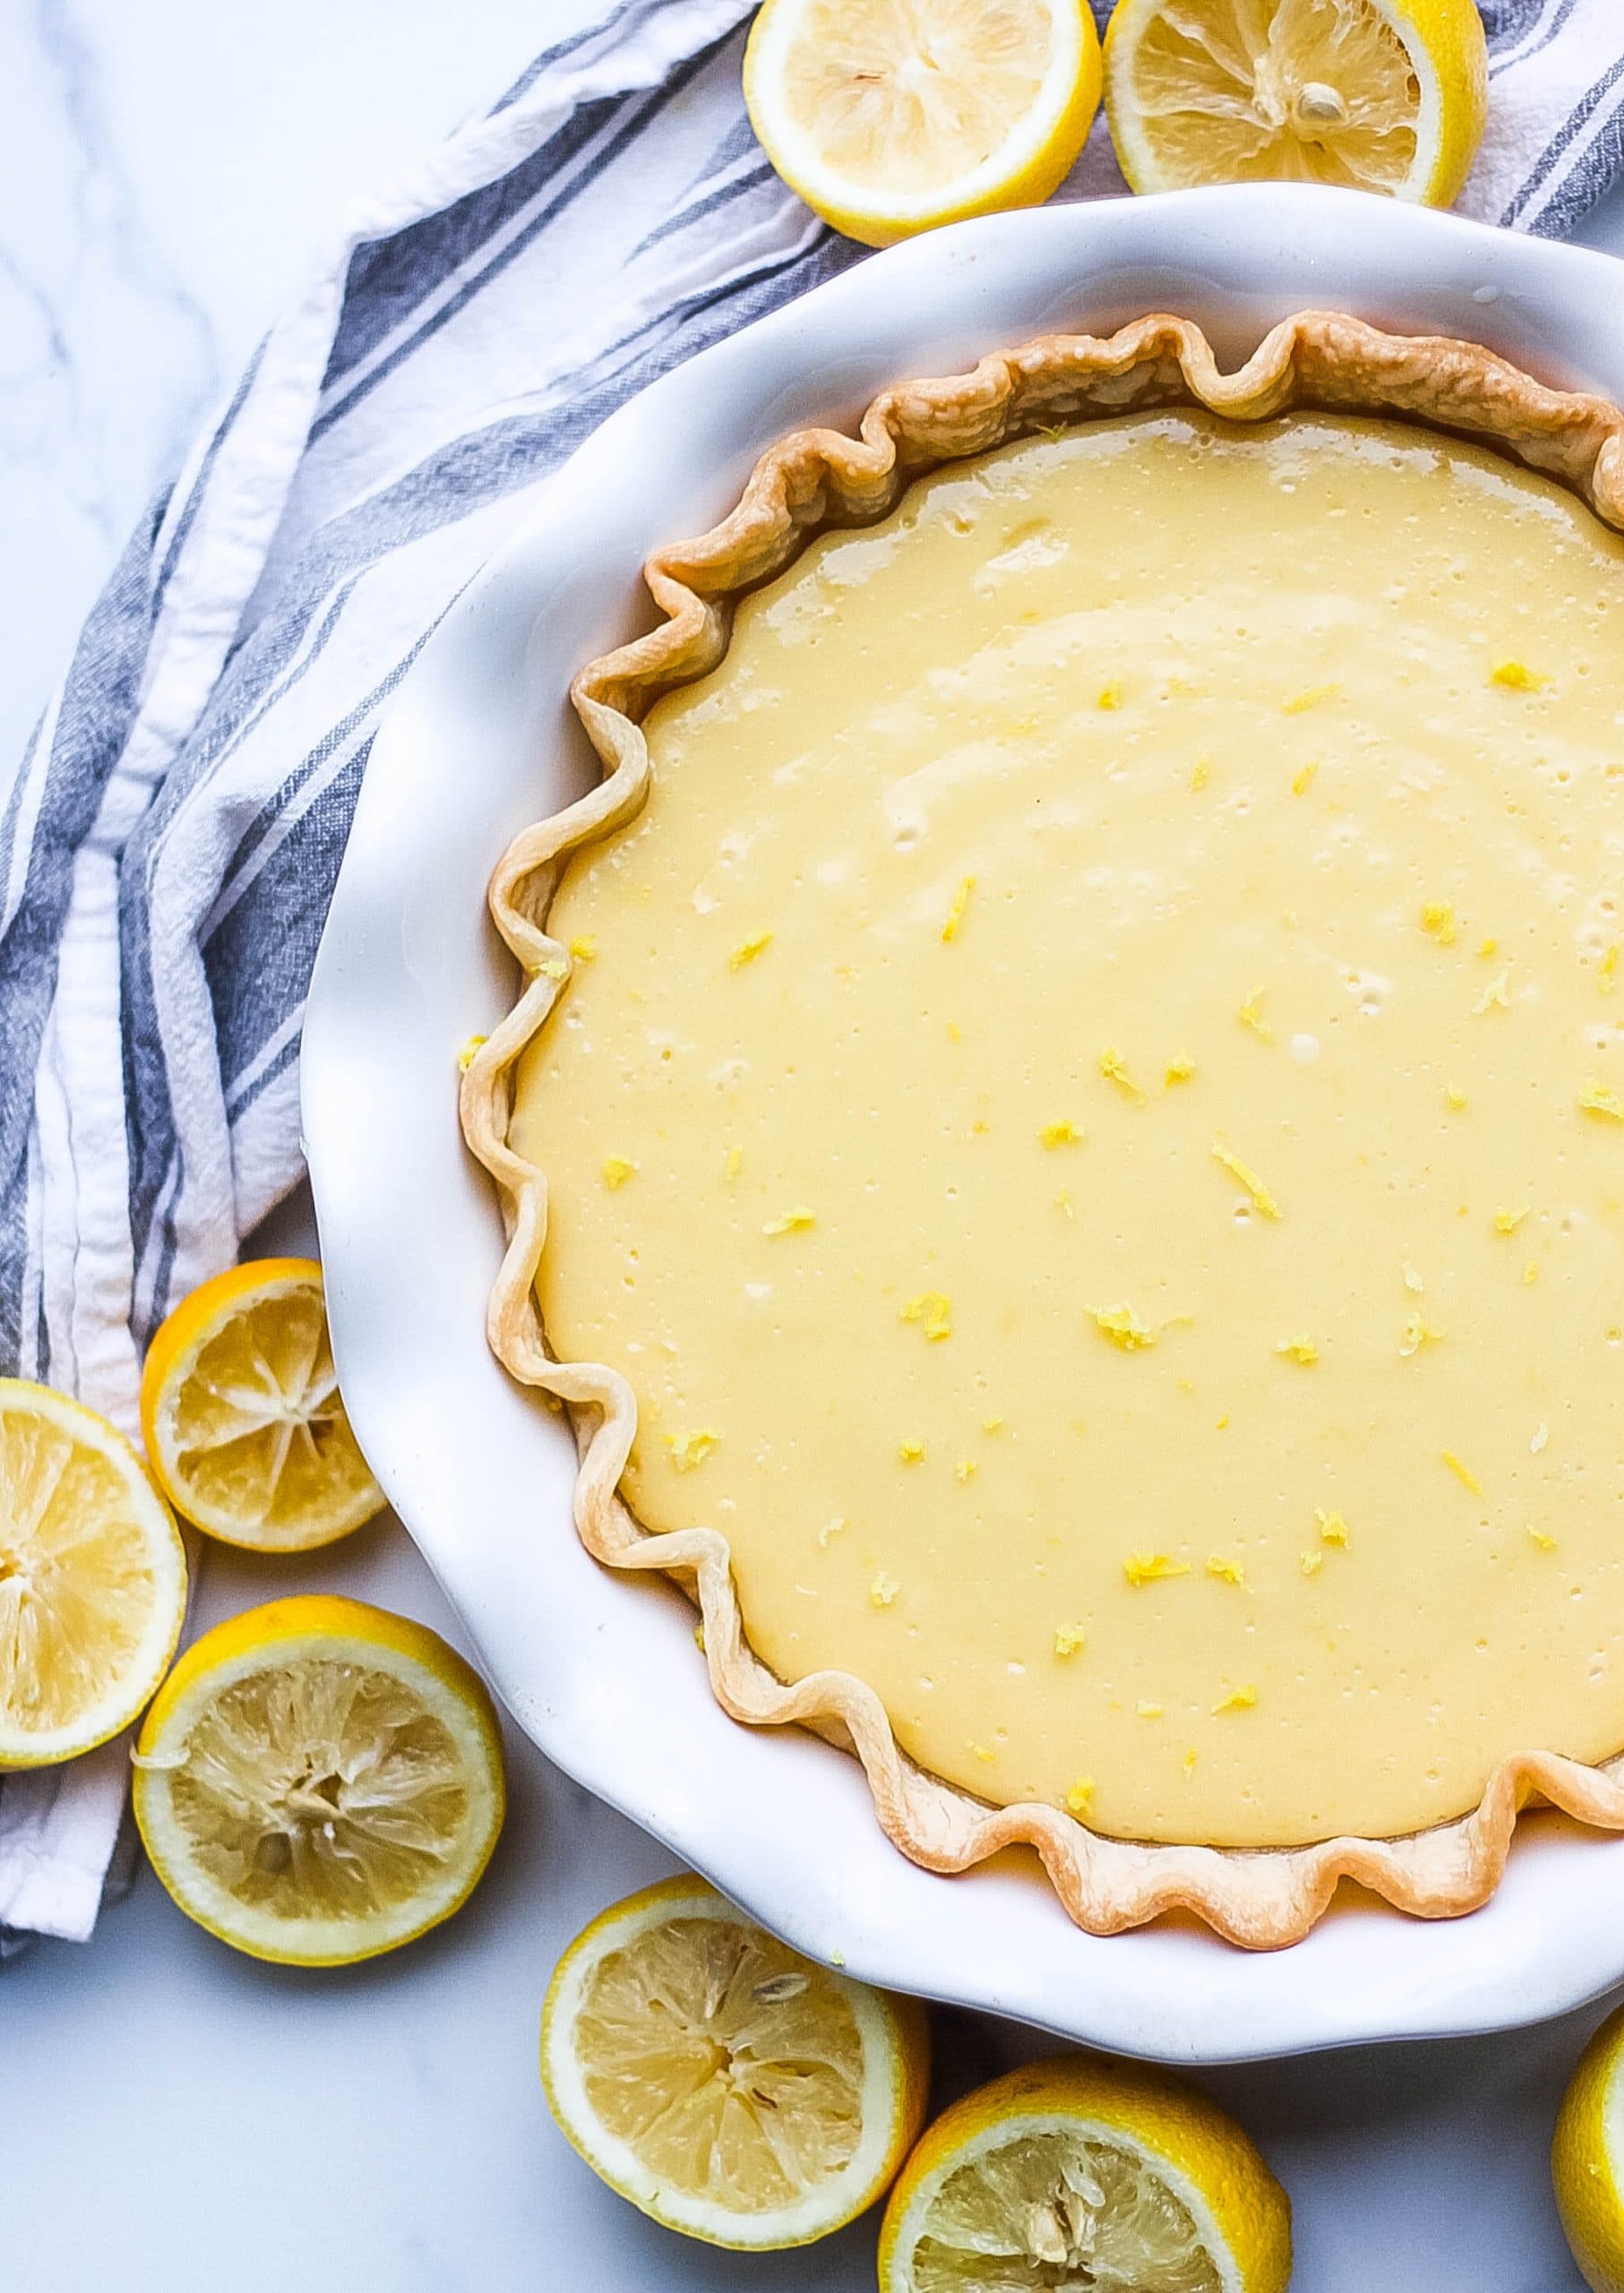 whole baked pie with lemons